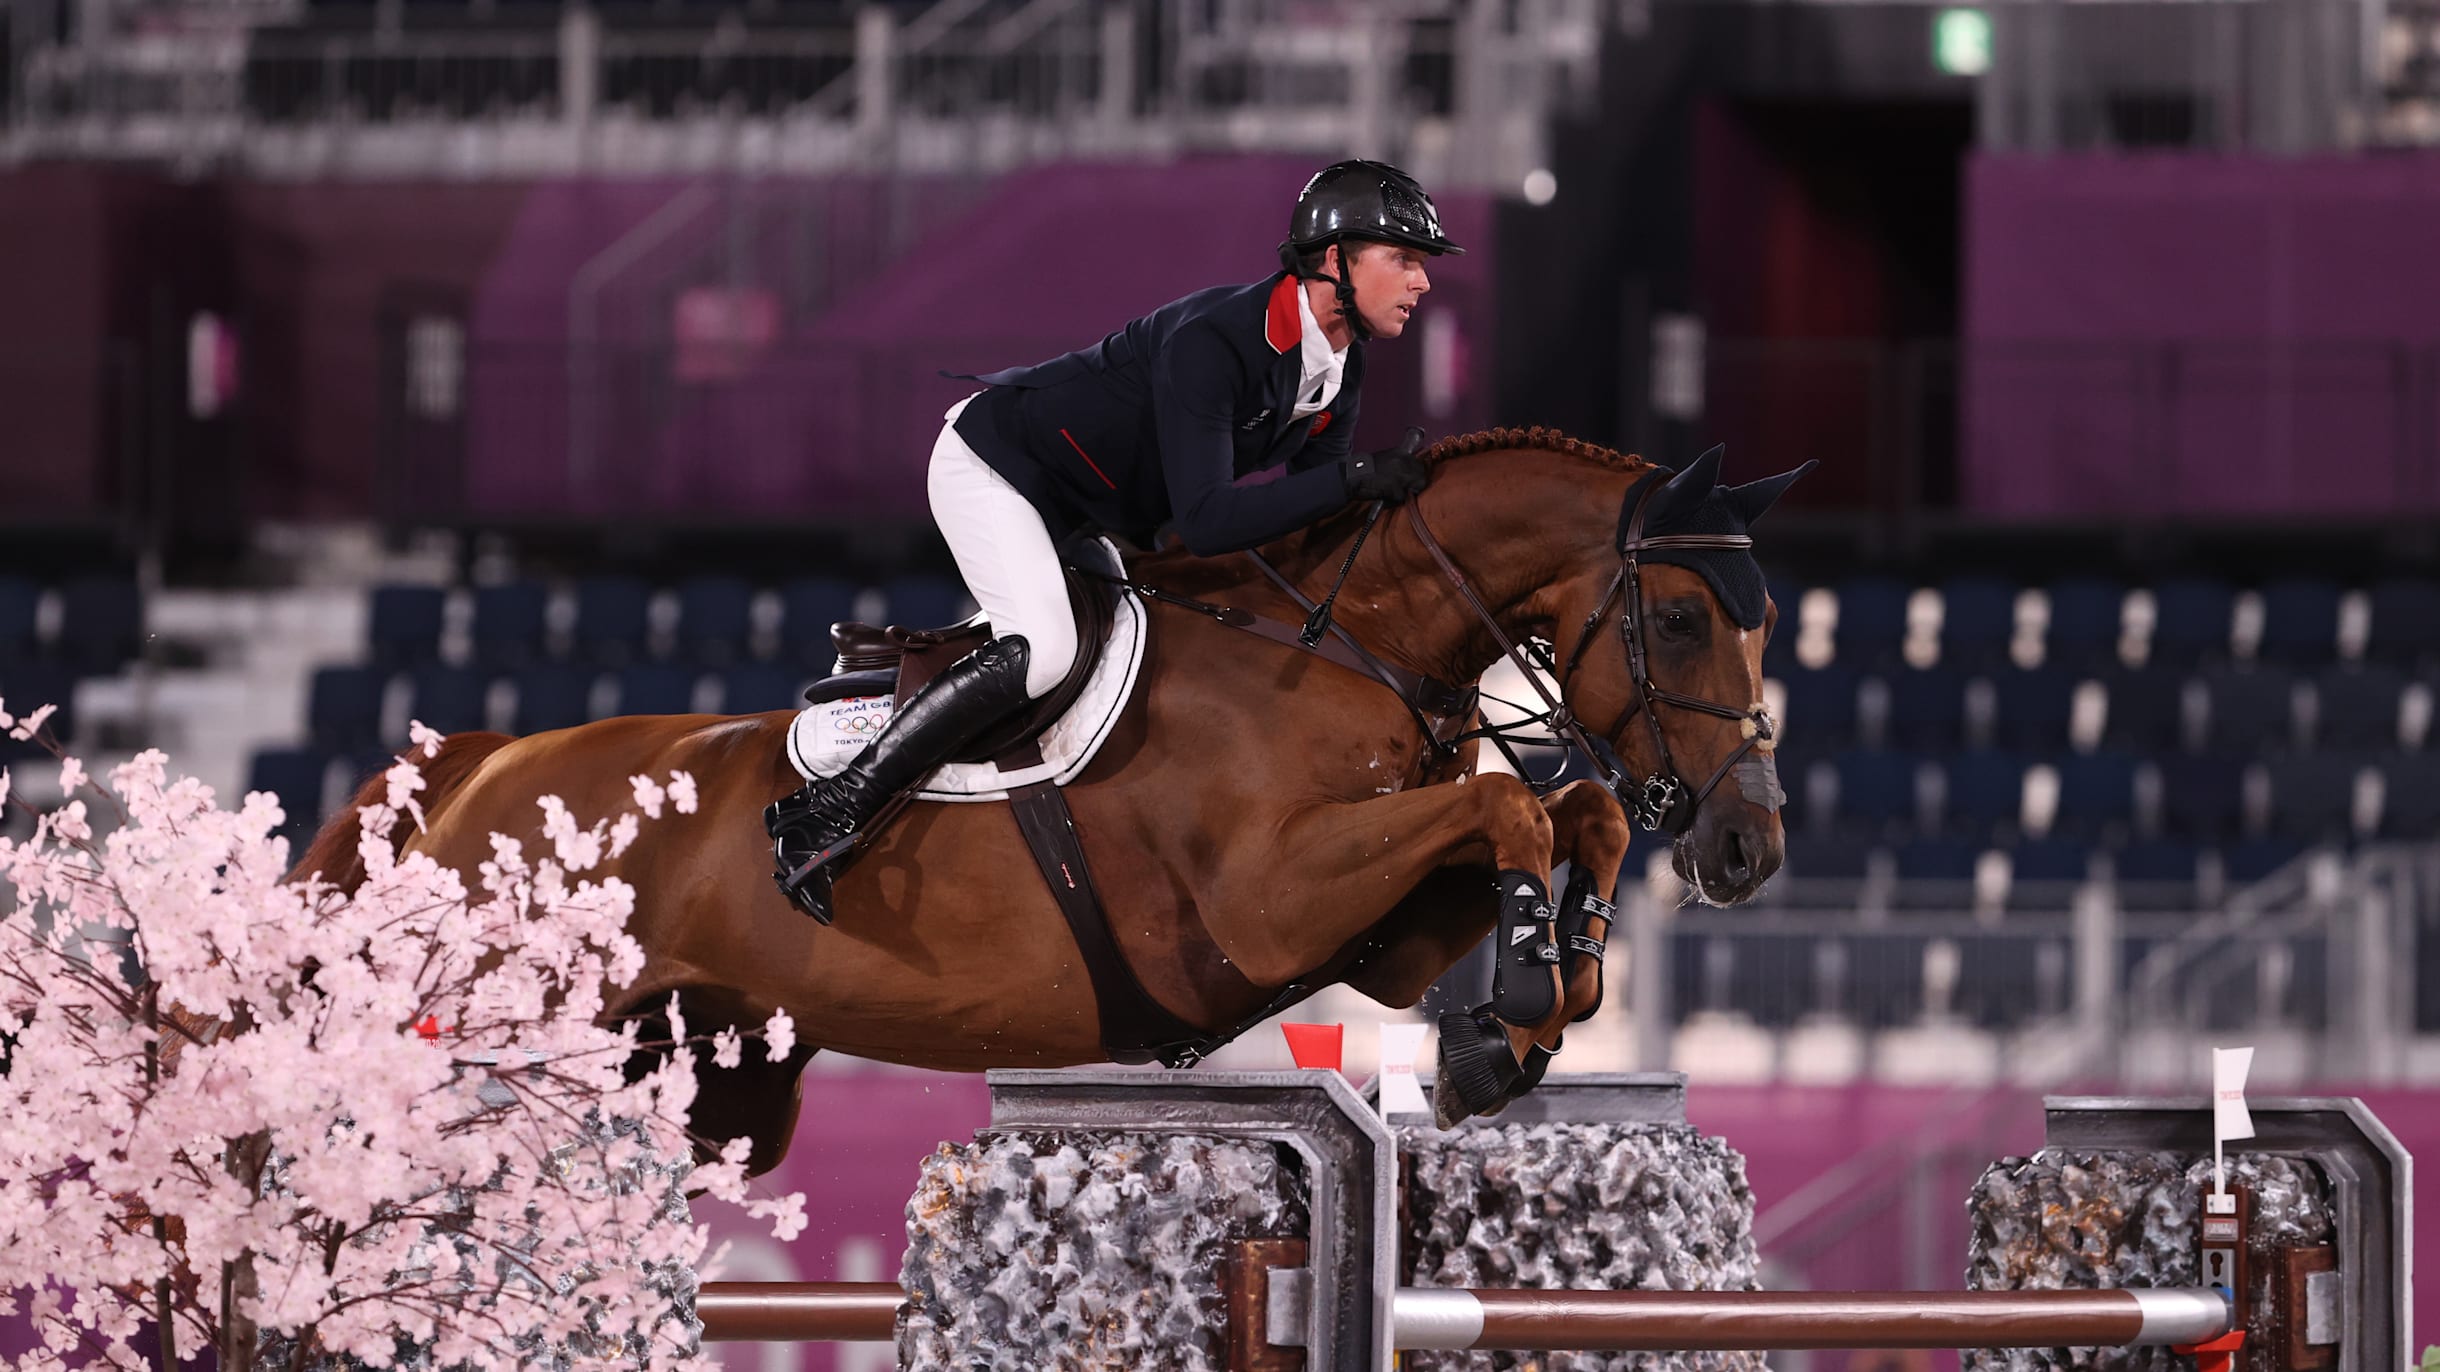 How to qualify for equestrian jumping at Paris 2024